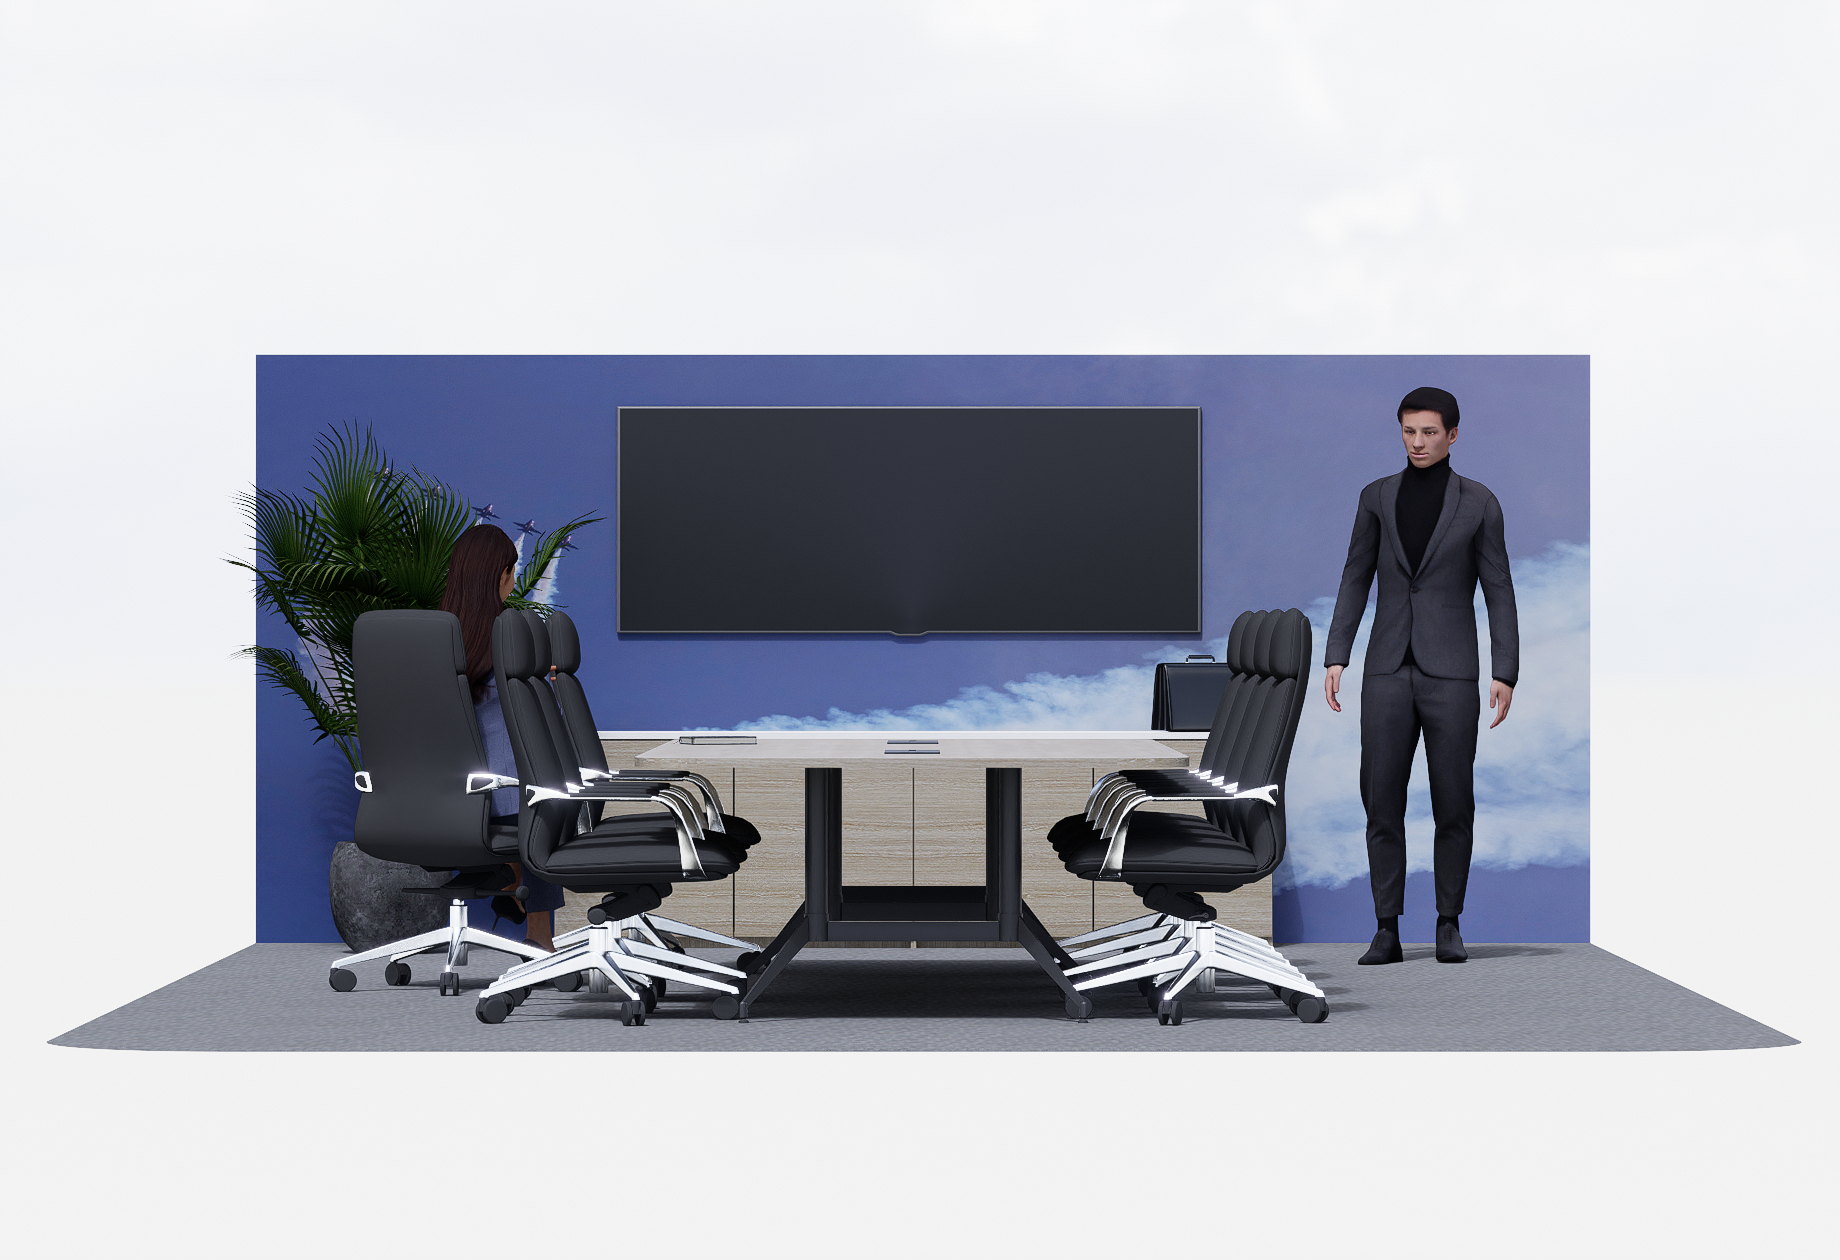 Large Meeting Room #3 Concept (1)